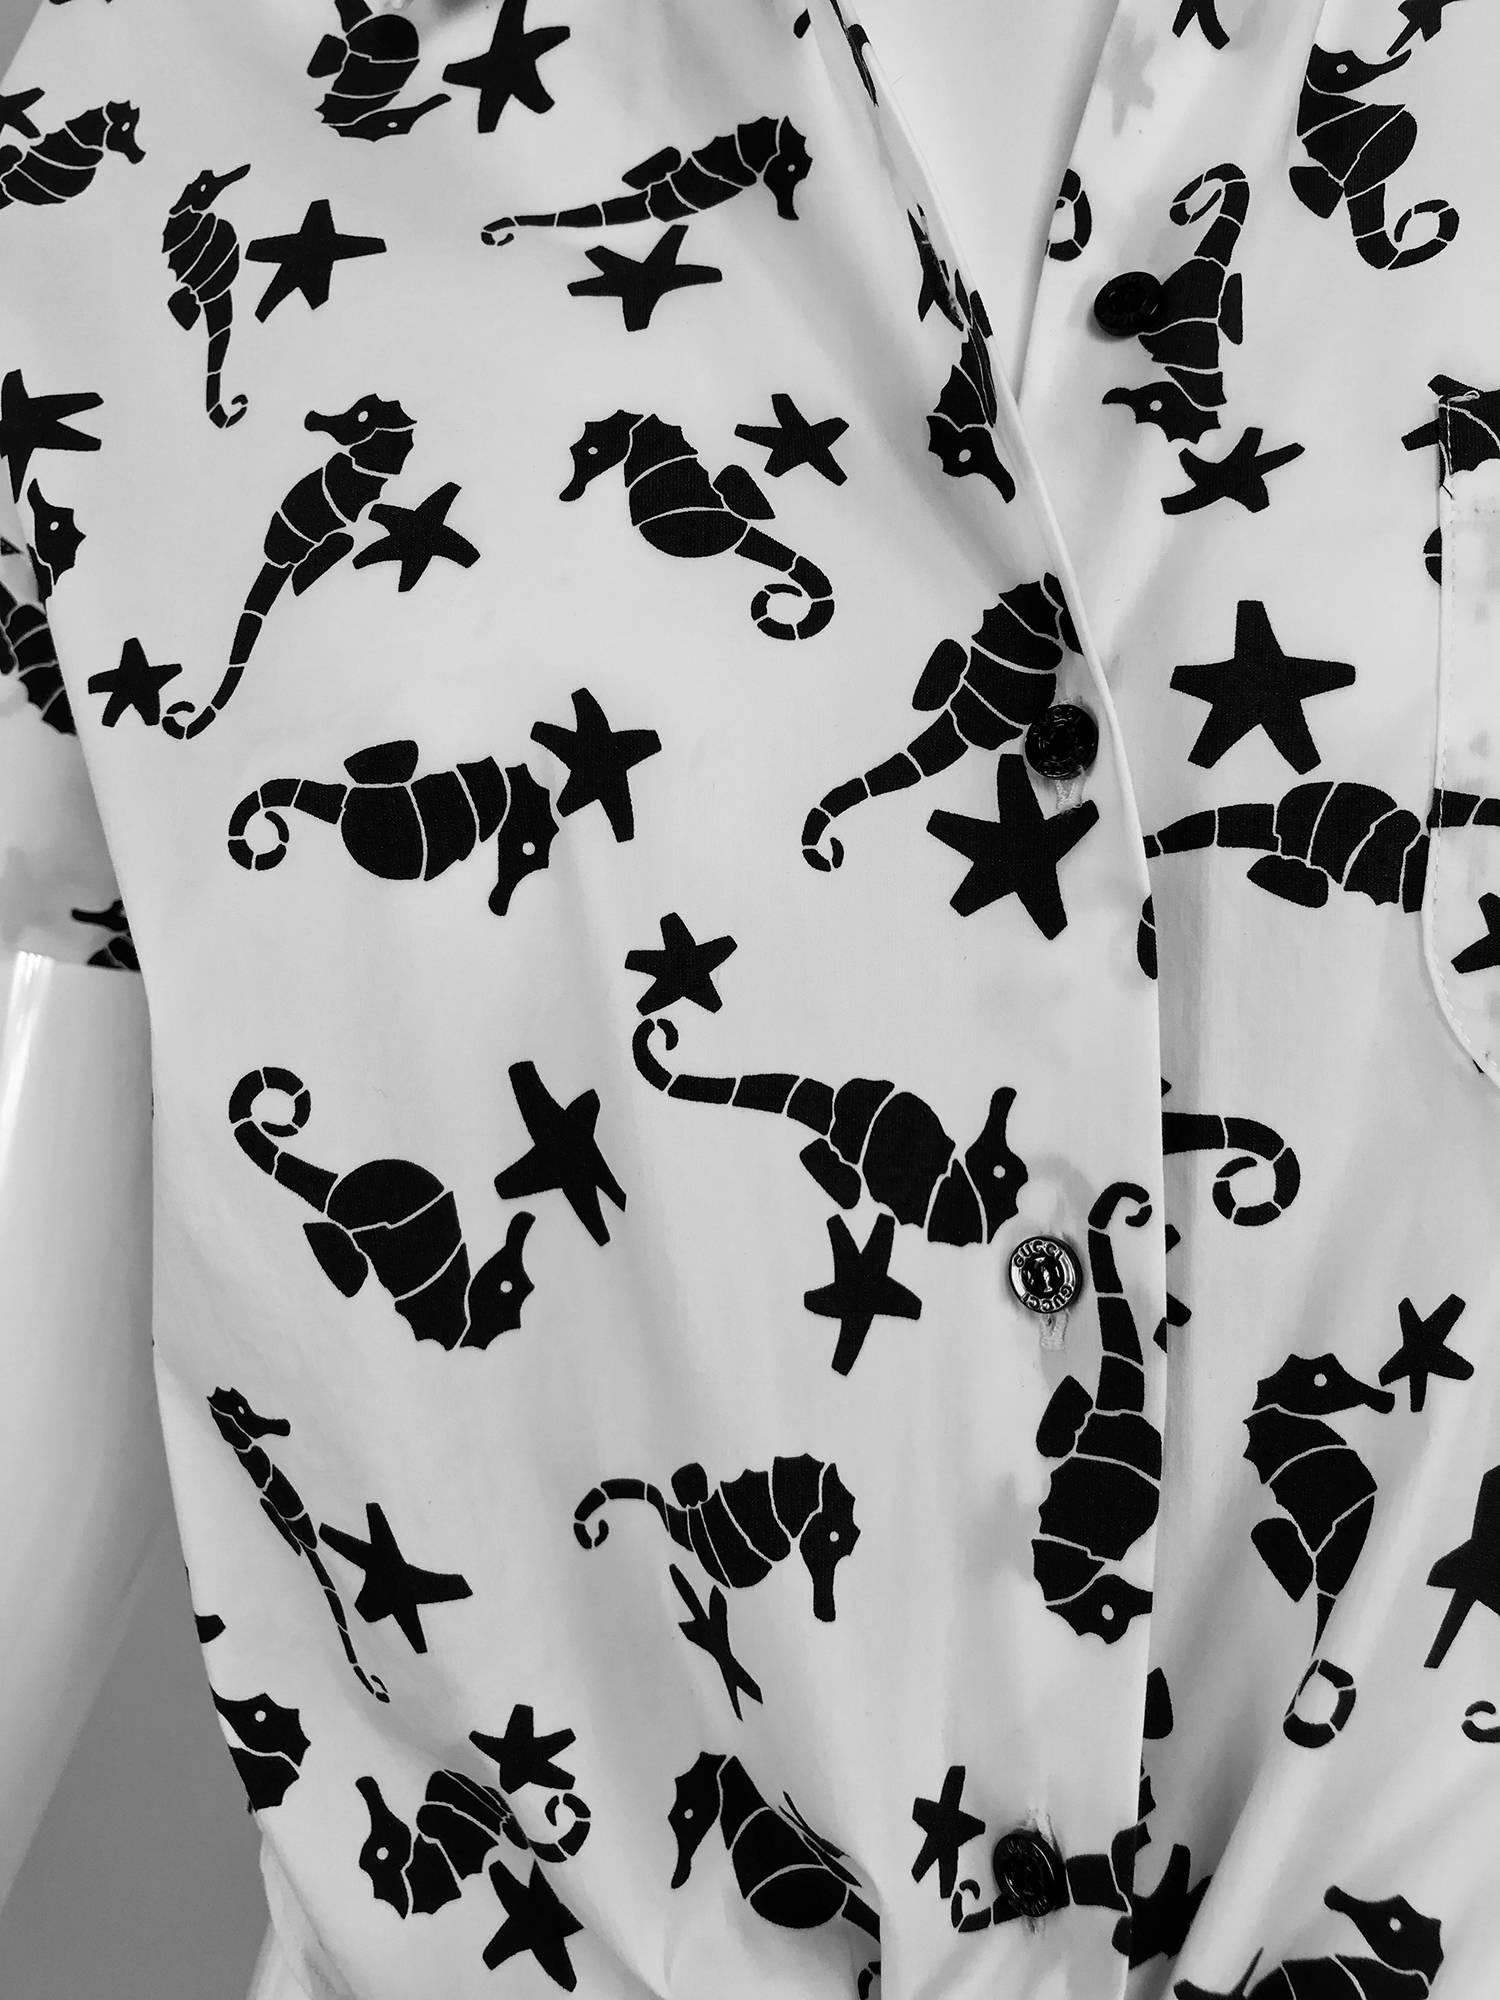 Gucci black and white sea horse print tie front blouse, short sleeves with button front and ties at the waist, single chest pocket...Unlined...Cotton, polymide and elastic, the fabric has stretch...Looks unworn...Marked size Large
In excellent